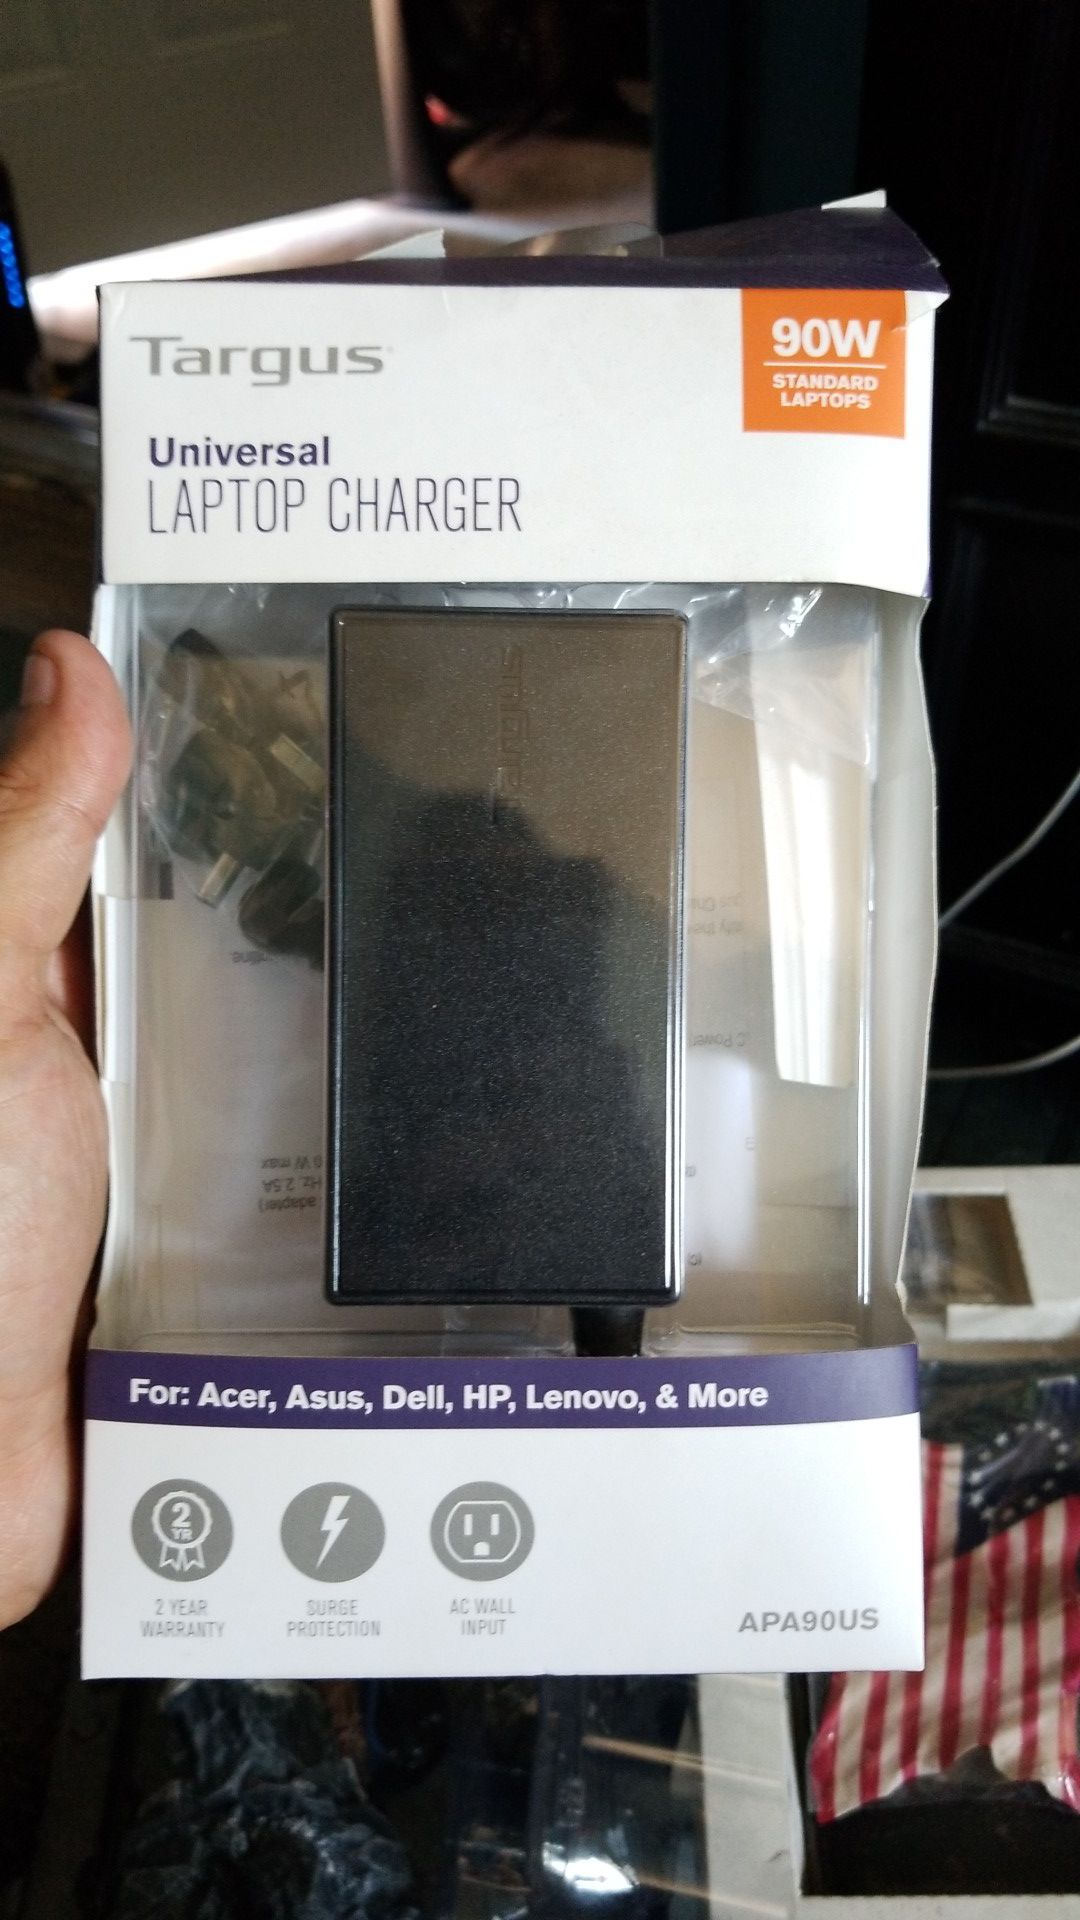 Universals laptop charger